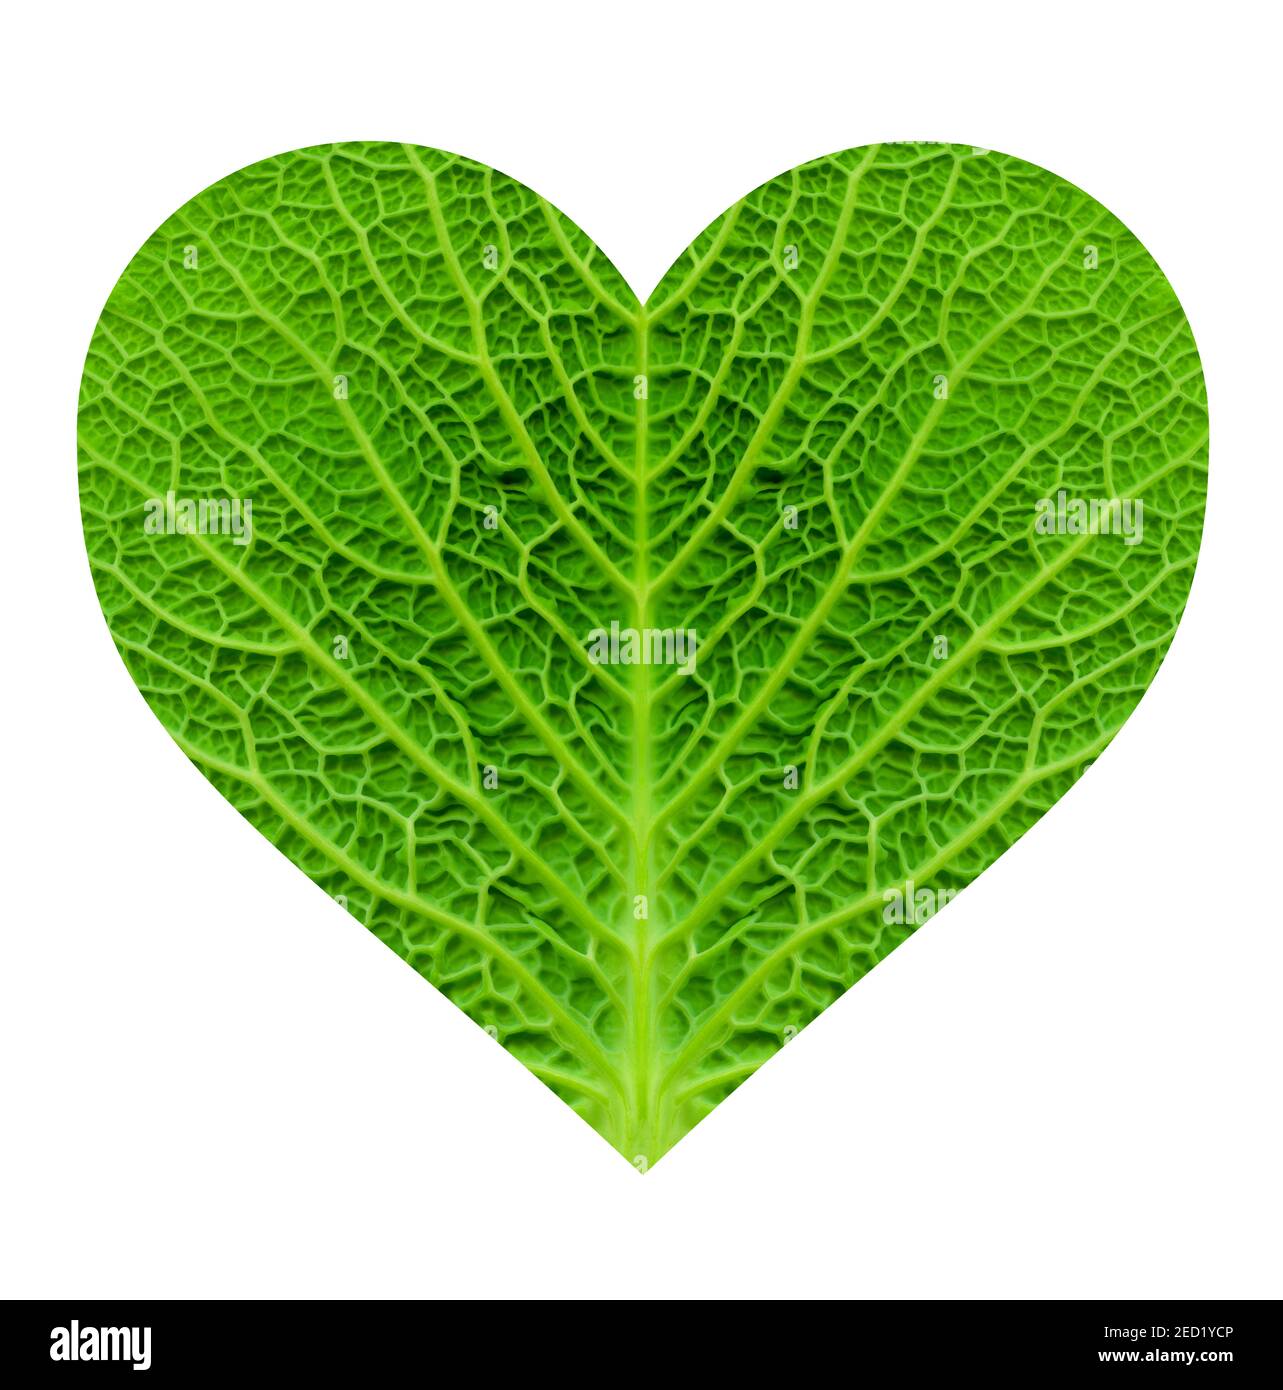 A stylised heart graphic produced from the texture and pattern of a cabbage leaf suggesting healthy eating Stock Photo